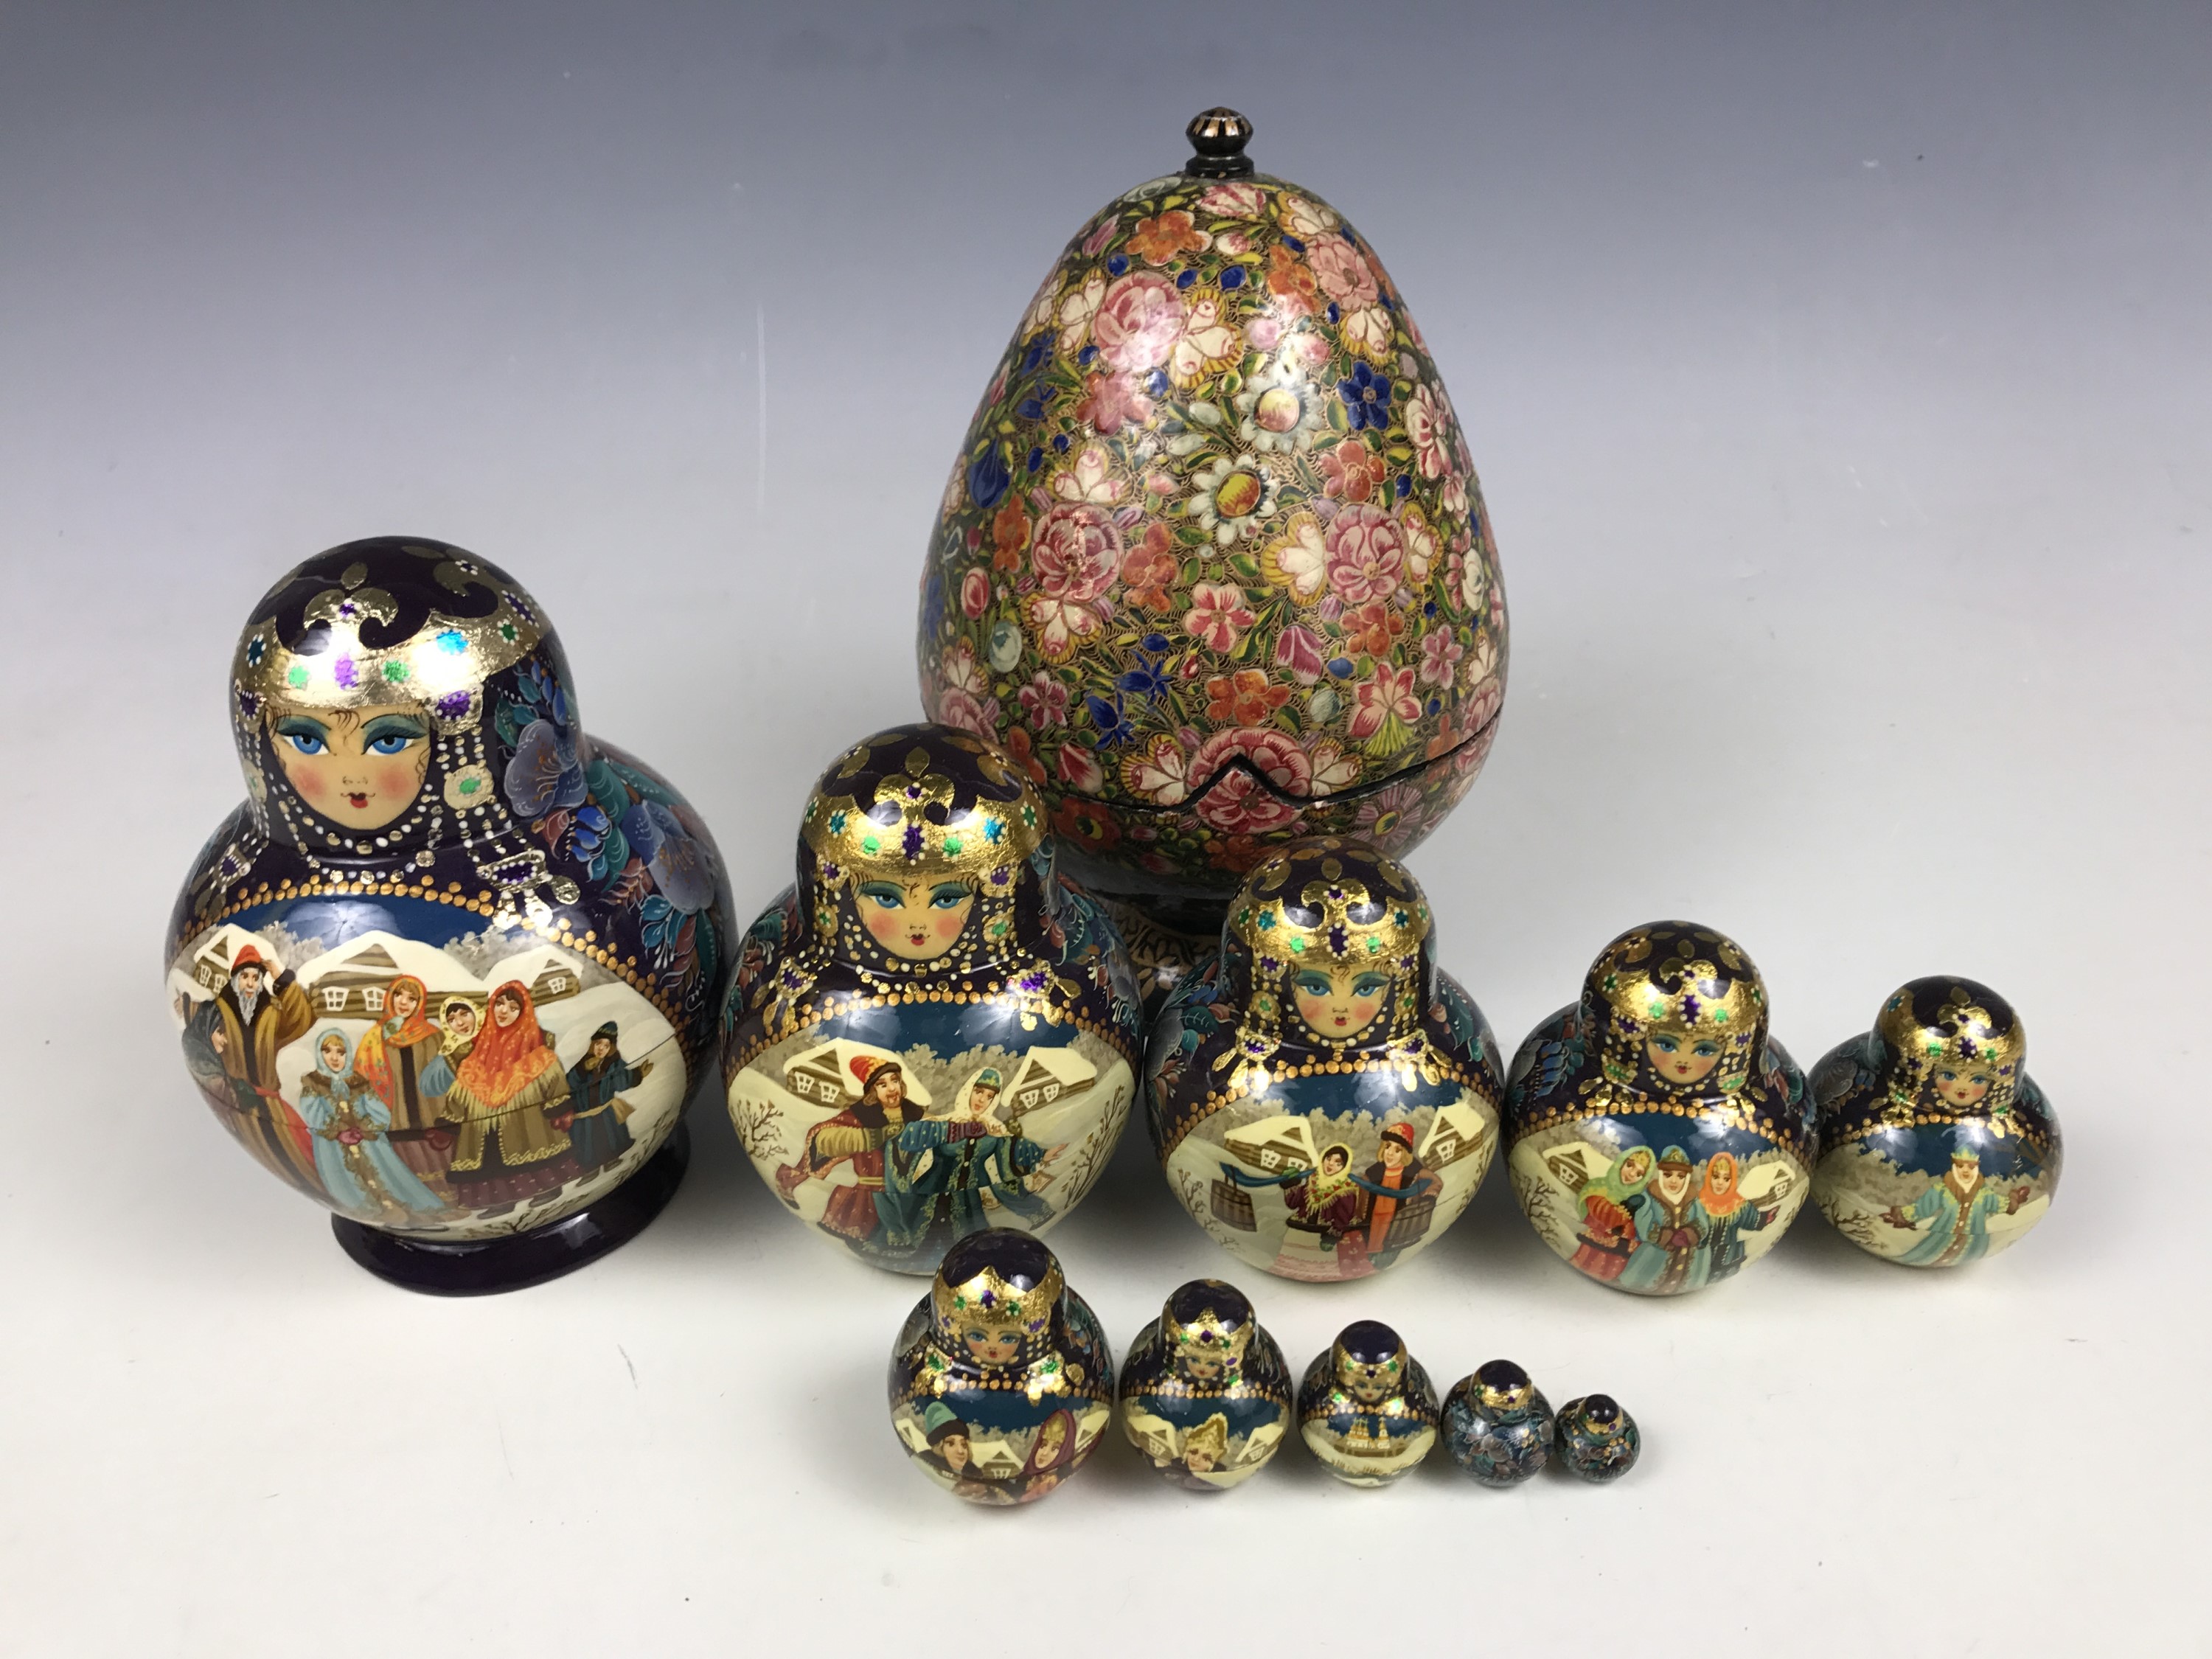 A set of Russian Maruska dolls together with an egg-form lacquered box